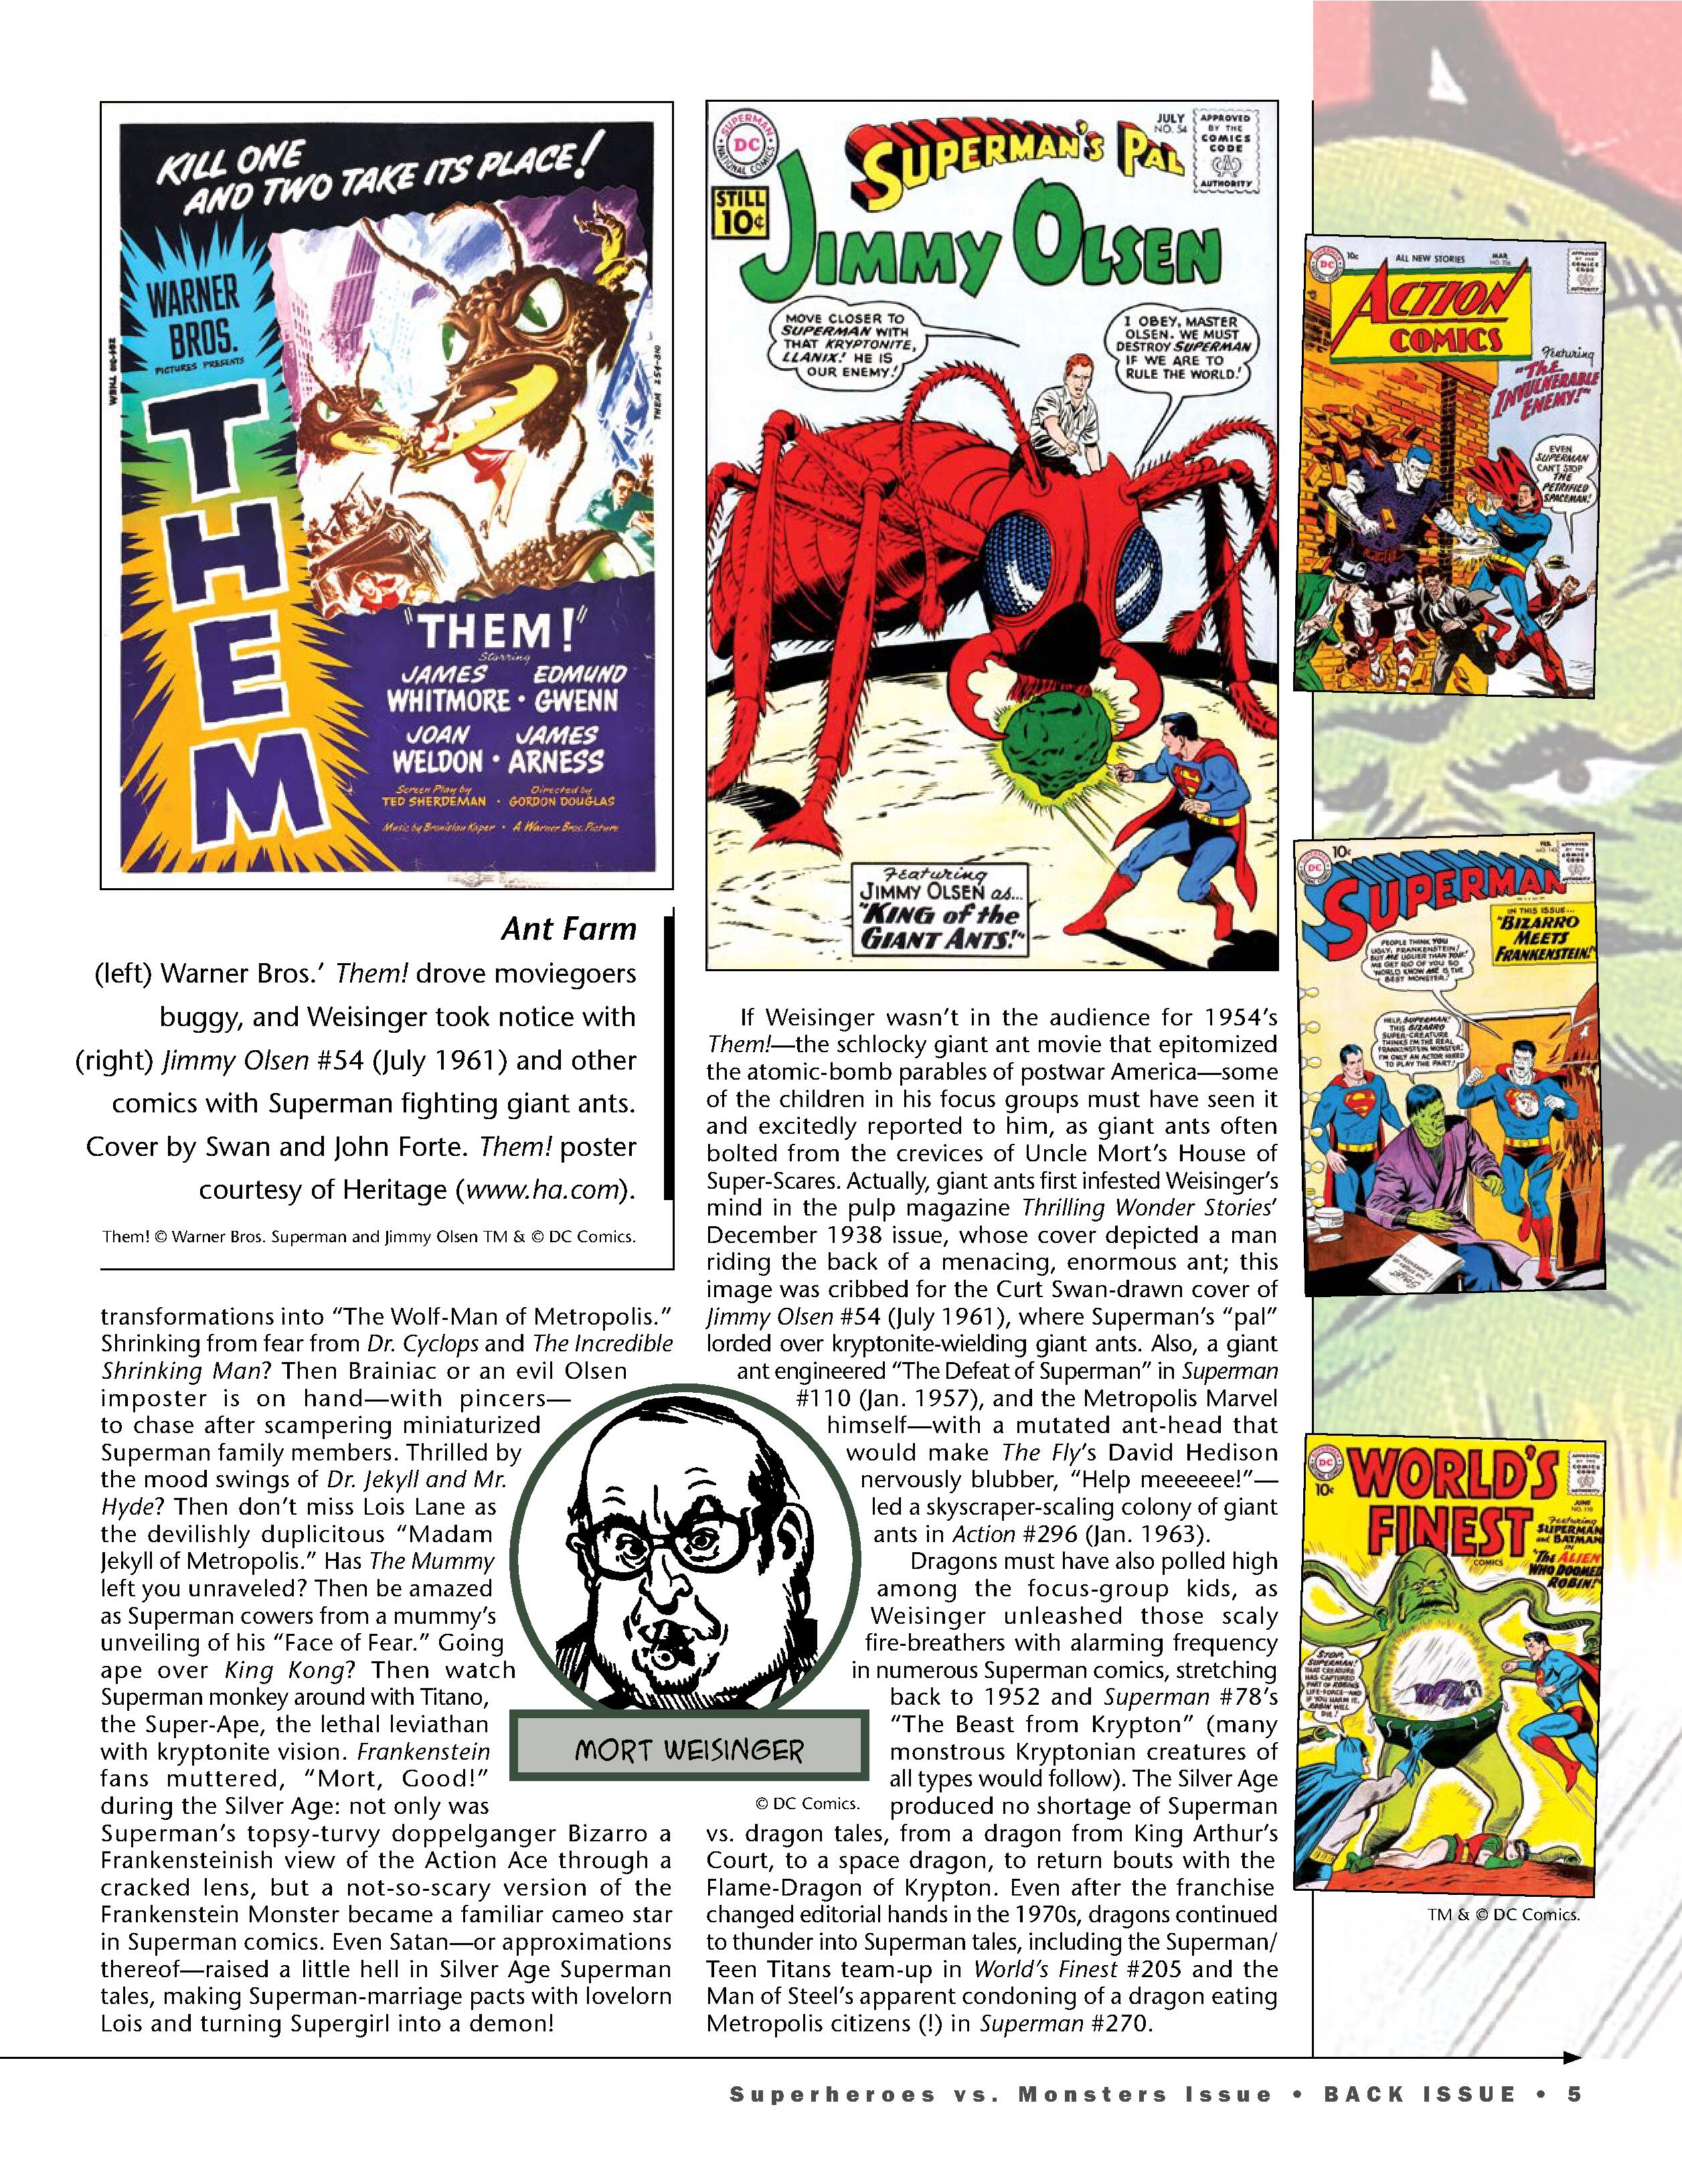 Read online Back Issue comic -  Issue #116 - 7